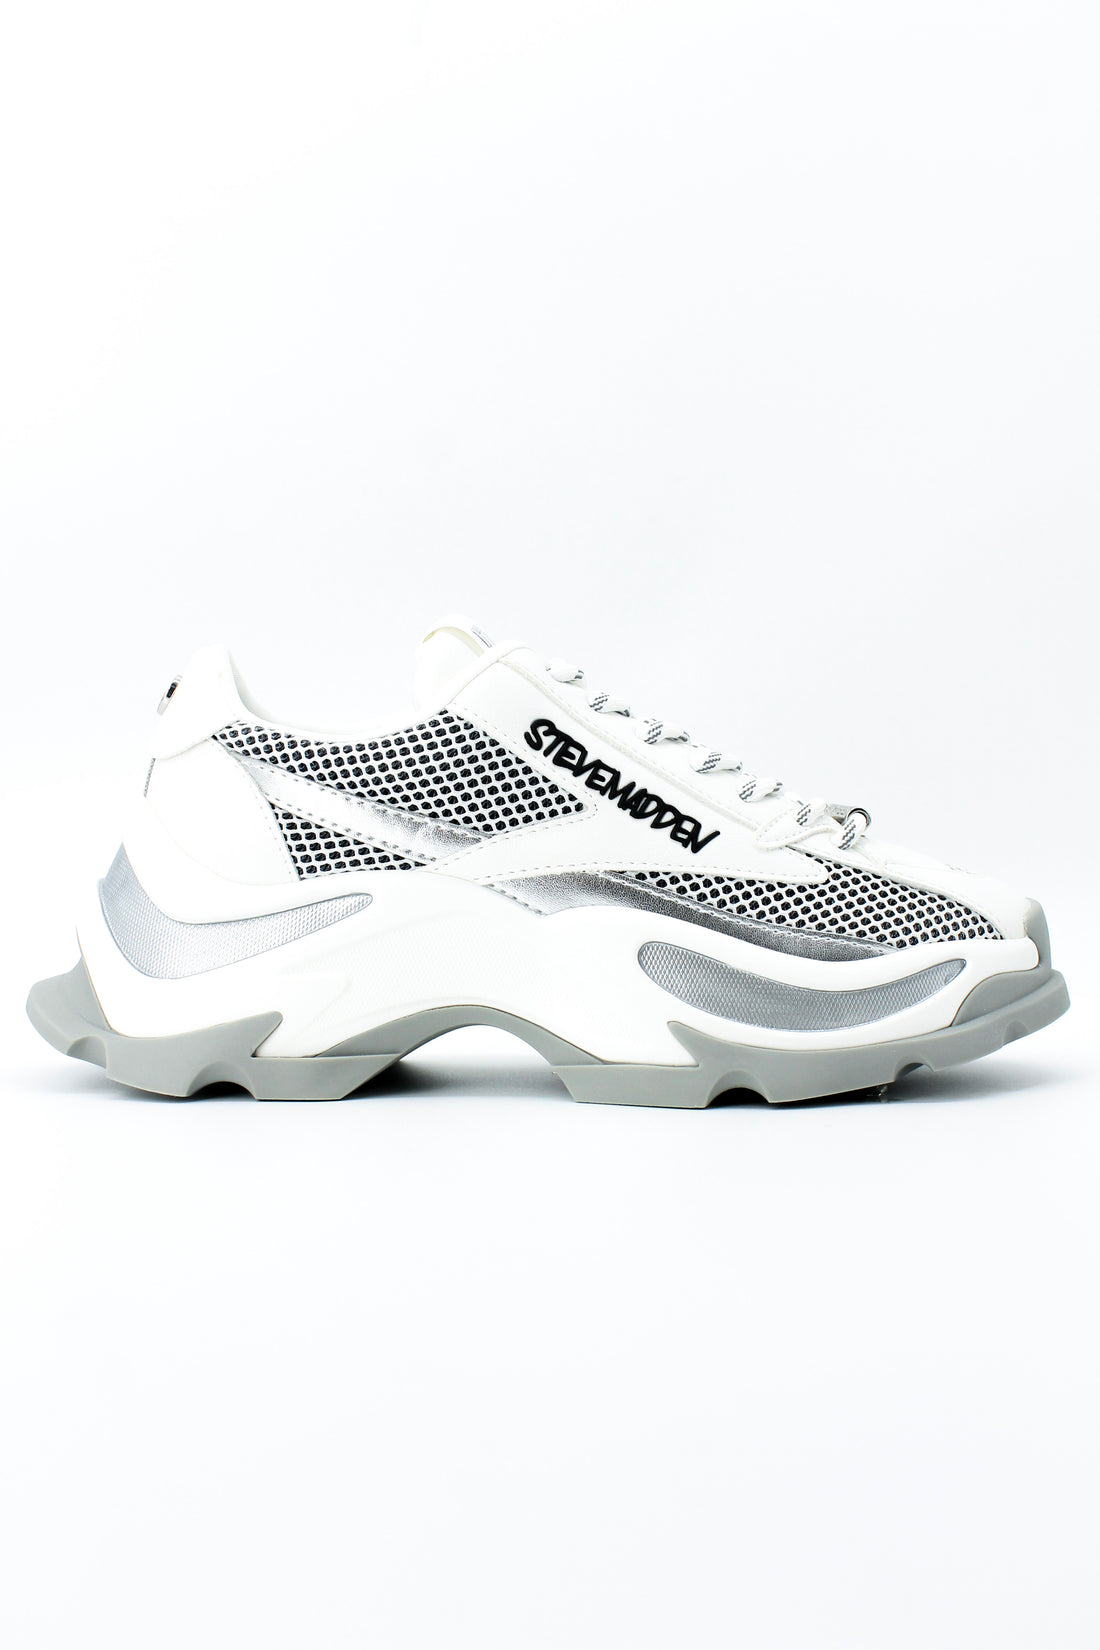 Steve Madden Zoomz White and Silver